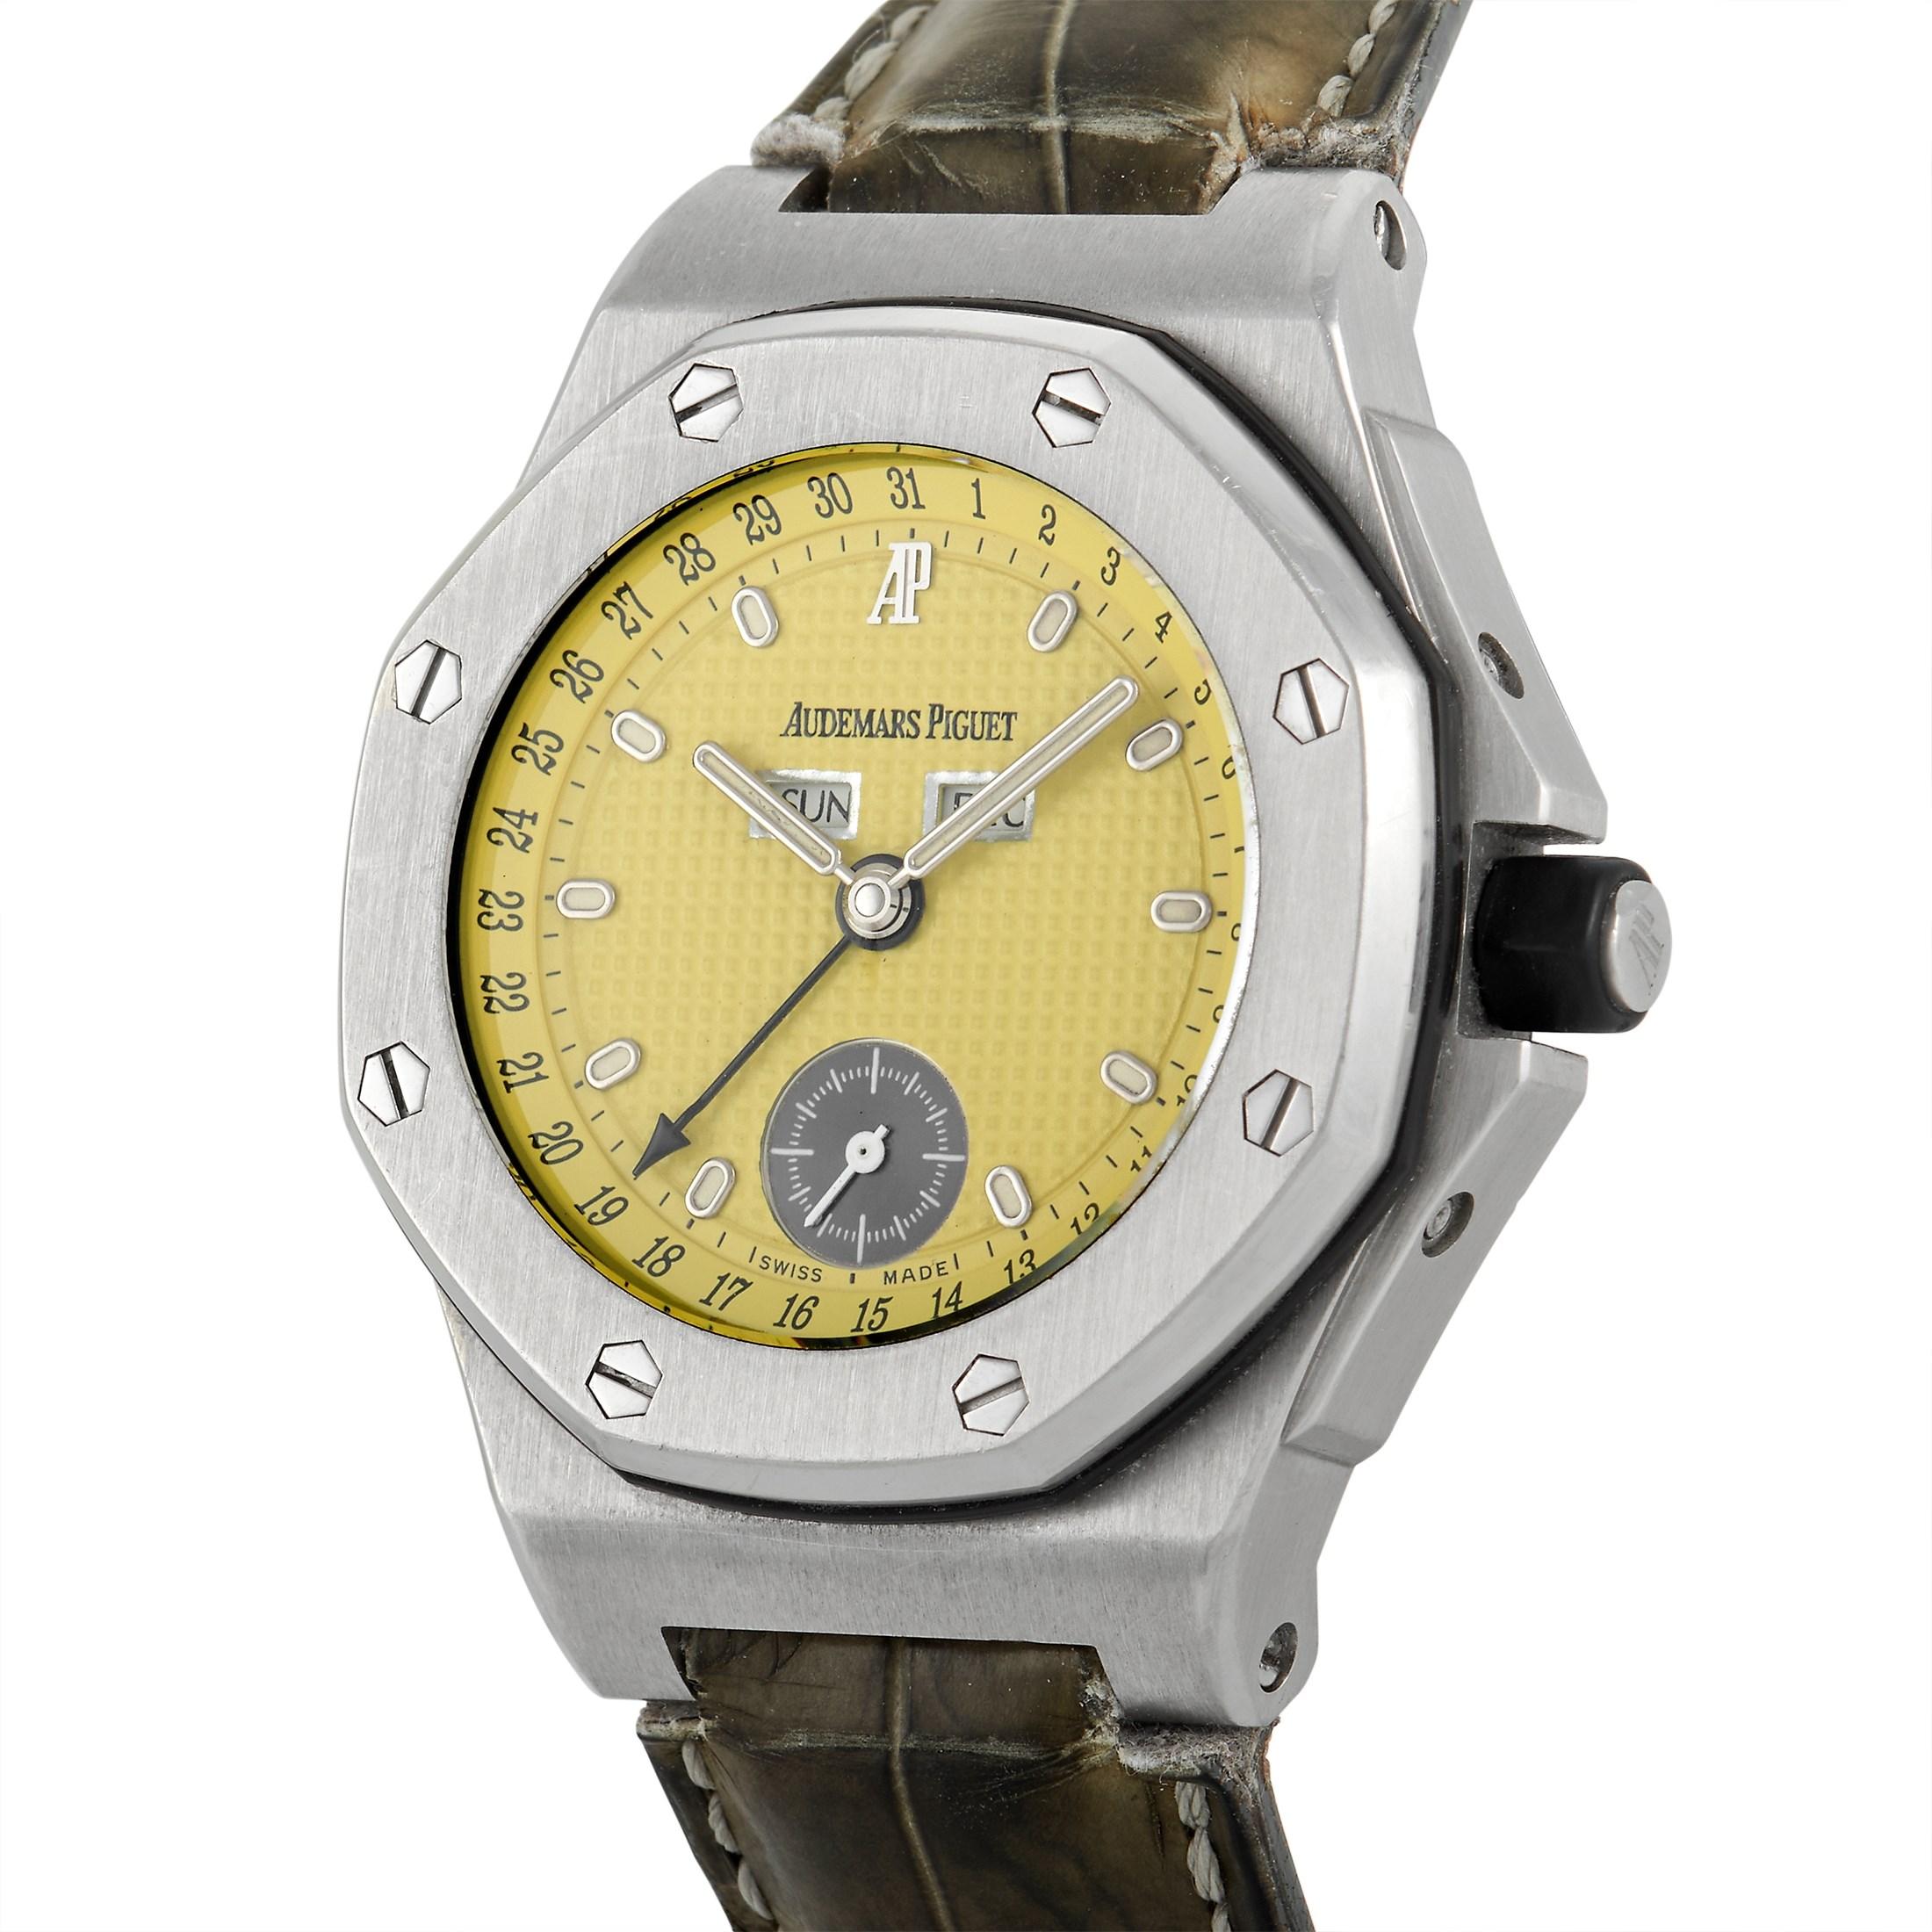 A timepiece with a full calendar, the Royal Oak 25808ST was released in late 1990s along with other different brightly-colored variations. This timepiece in particular displays an eye-catching and statement-making yellow Petit Tapisserie dial with